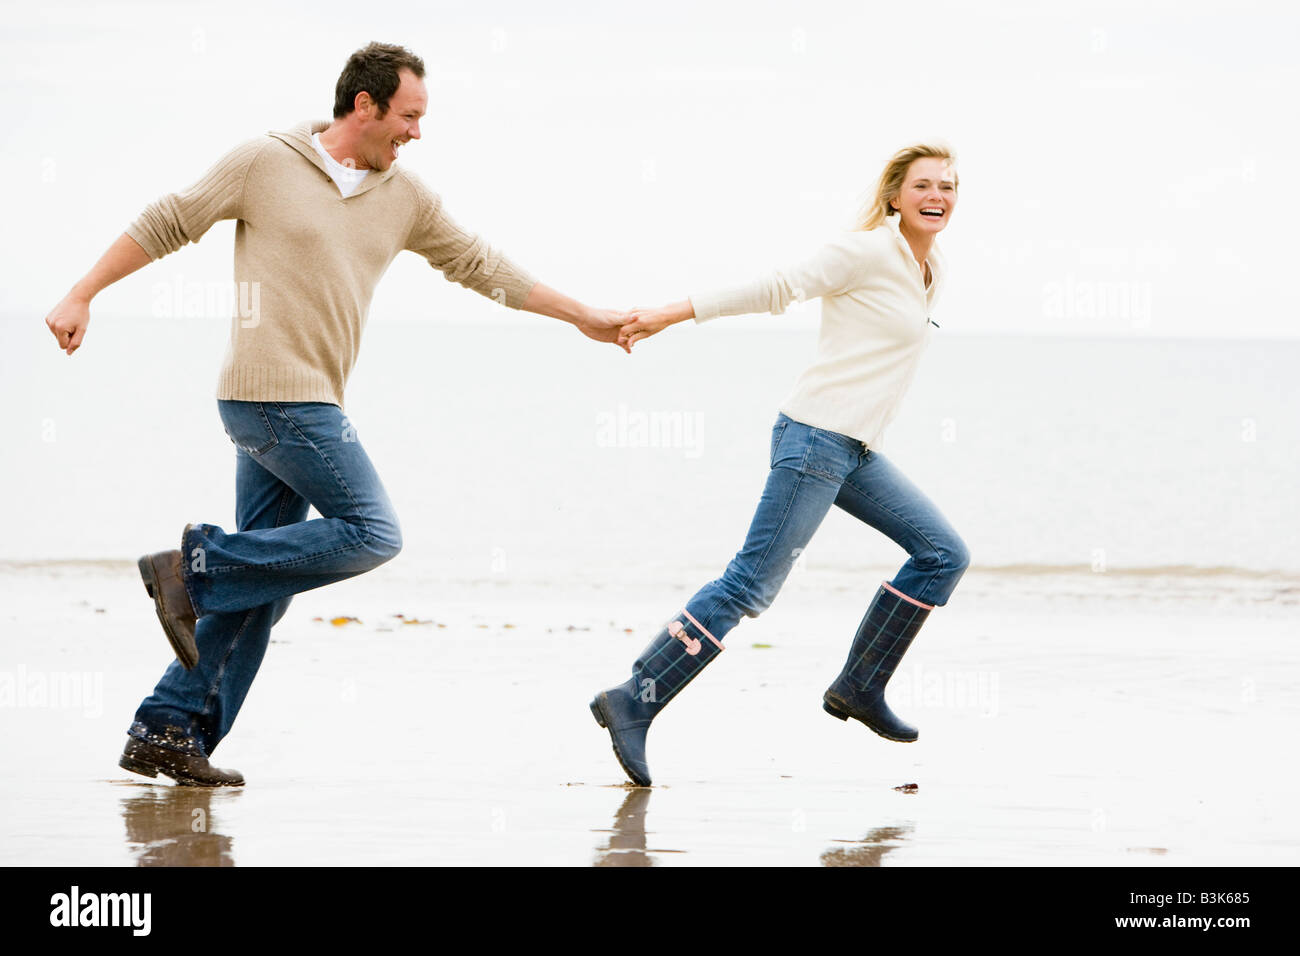 Couple running on beach holding hands smiling Banque D'Images